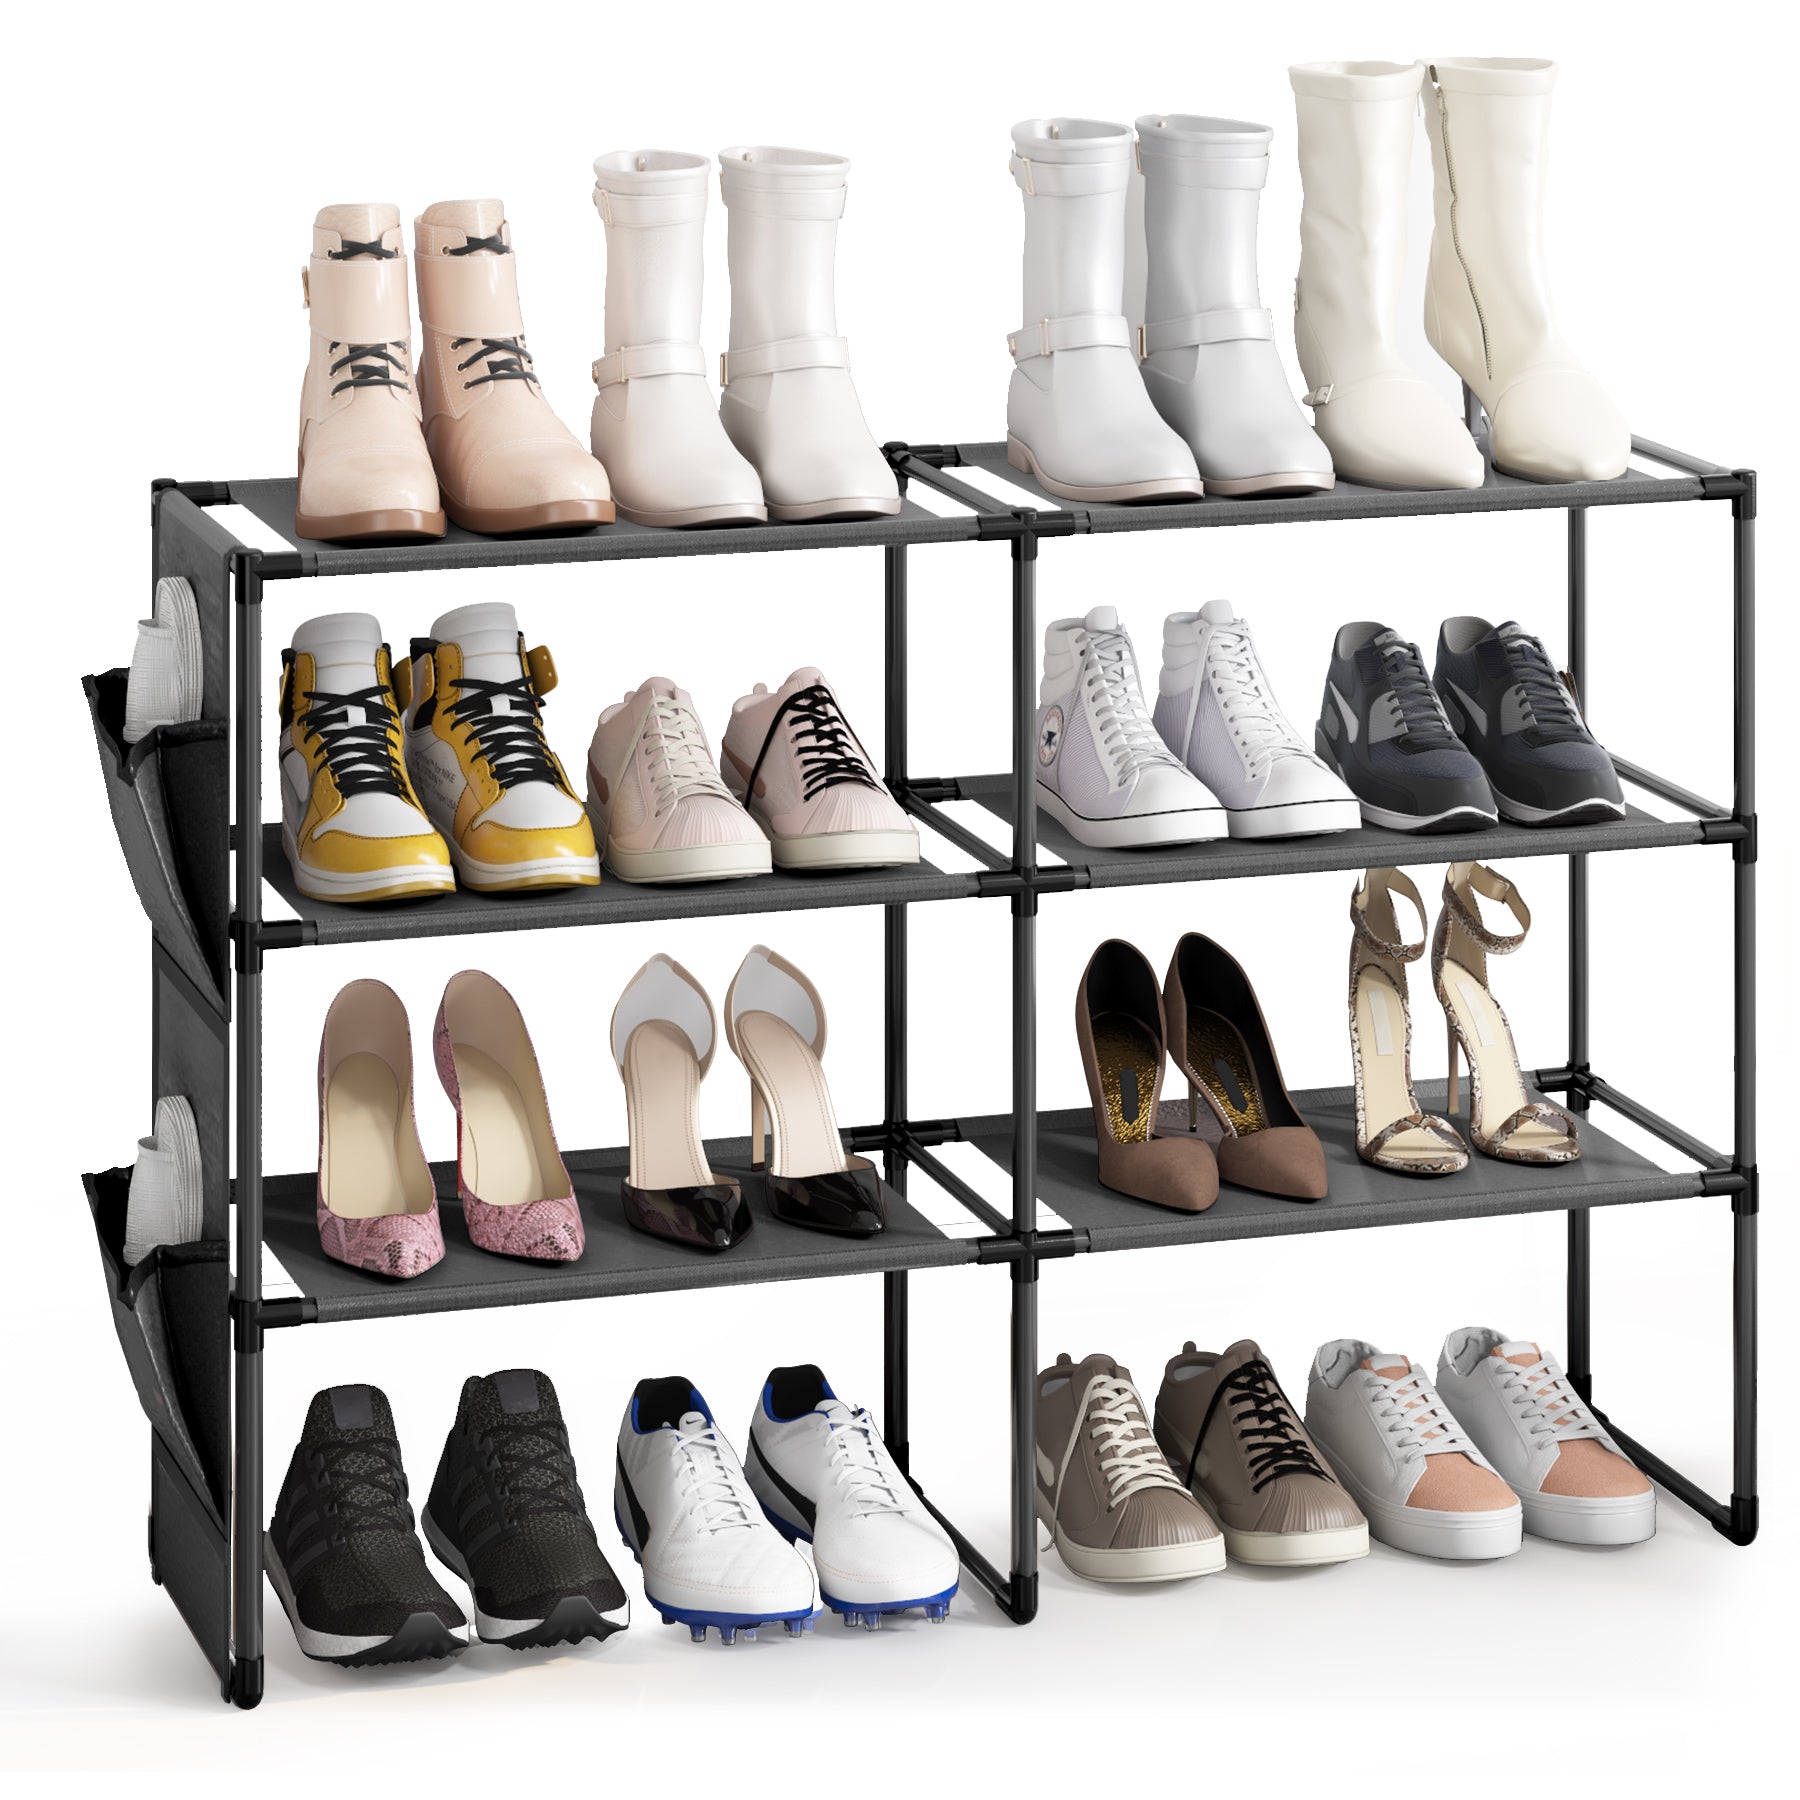 VASAGLE 5-Tier Shoe Rack, Narrow Shoe Organizer, for Closet Entryway, with 4 Fabric Shelves and Top